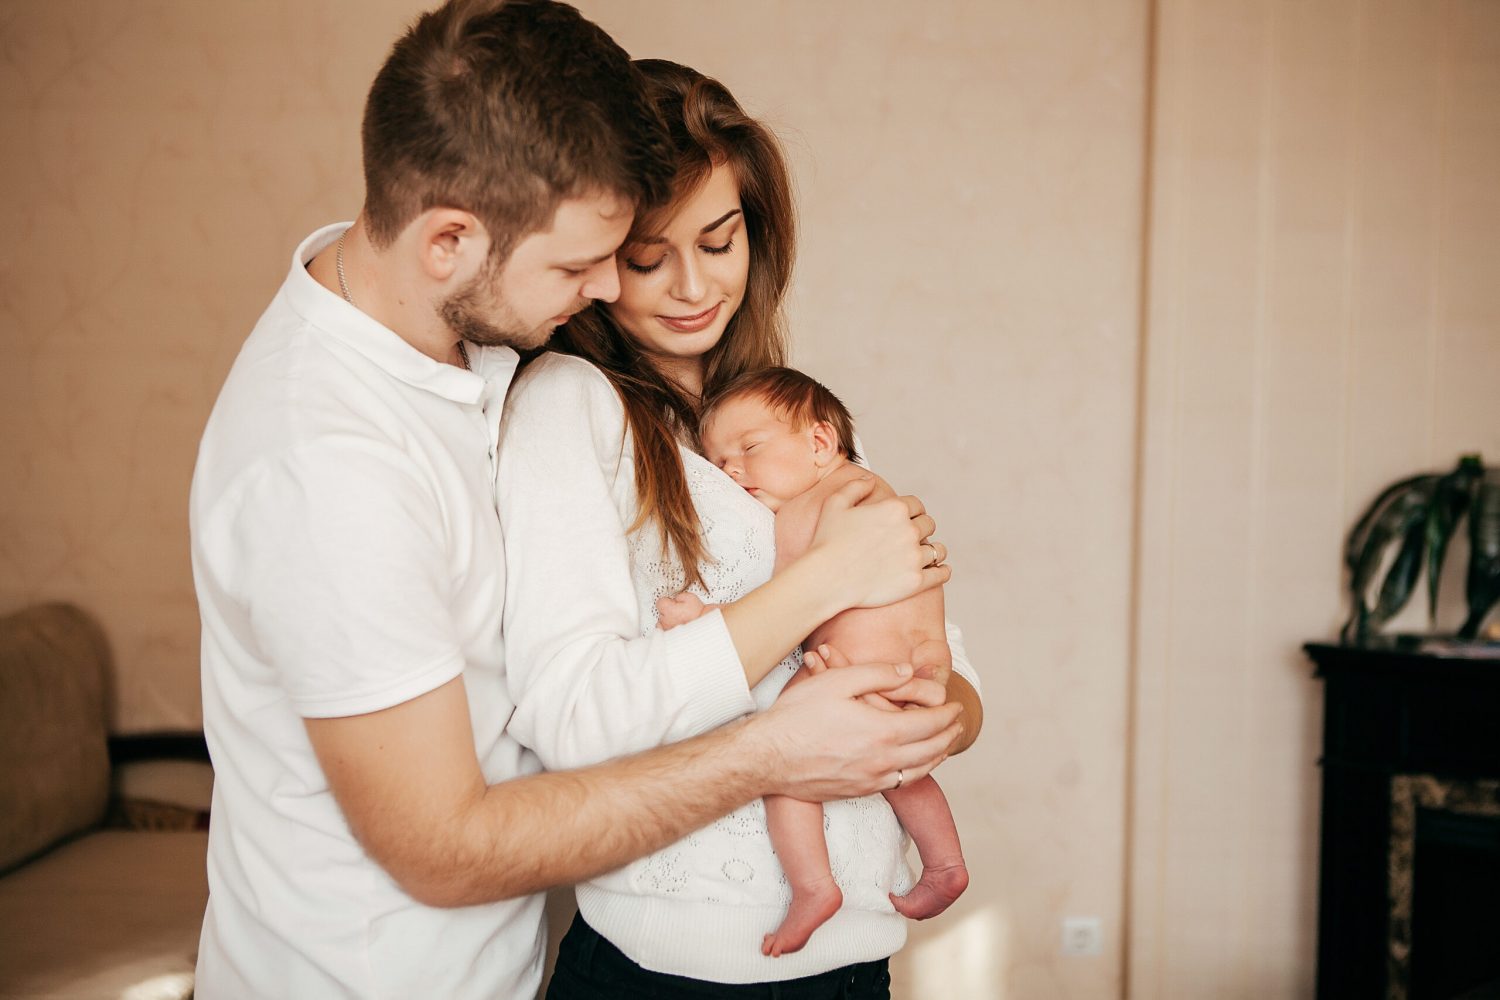 Newborn baby in the arms of young parents